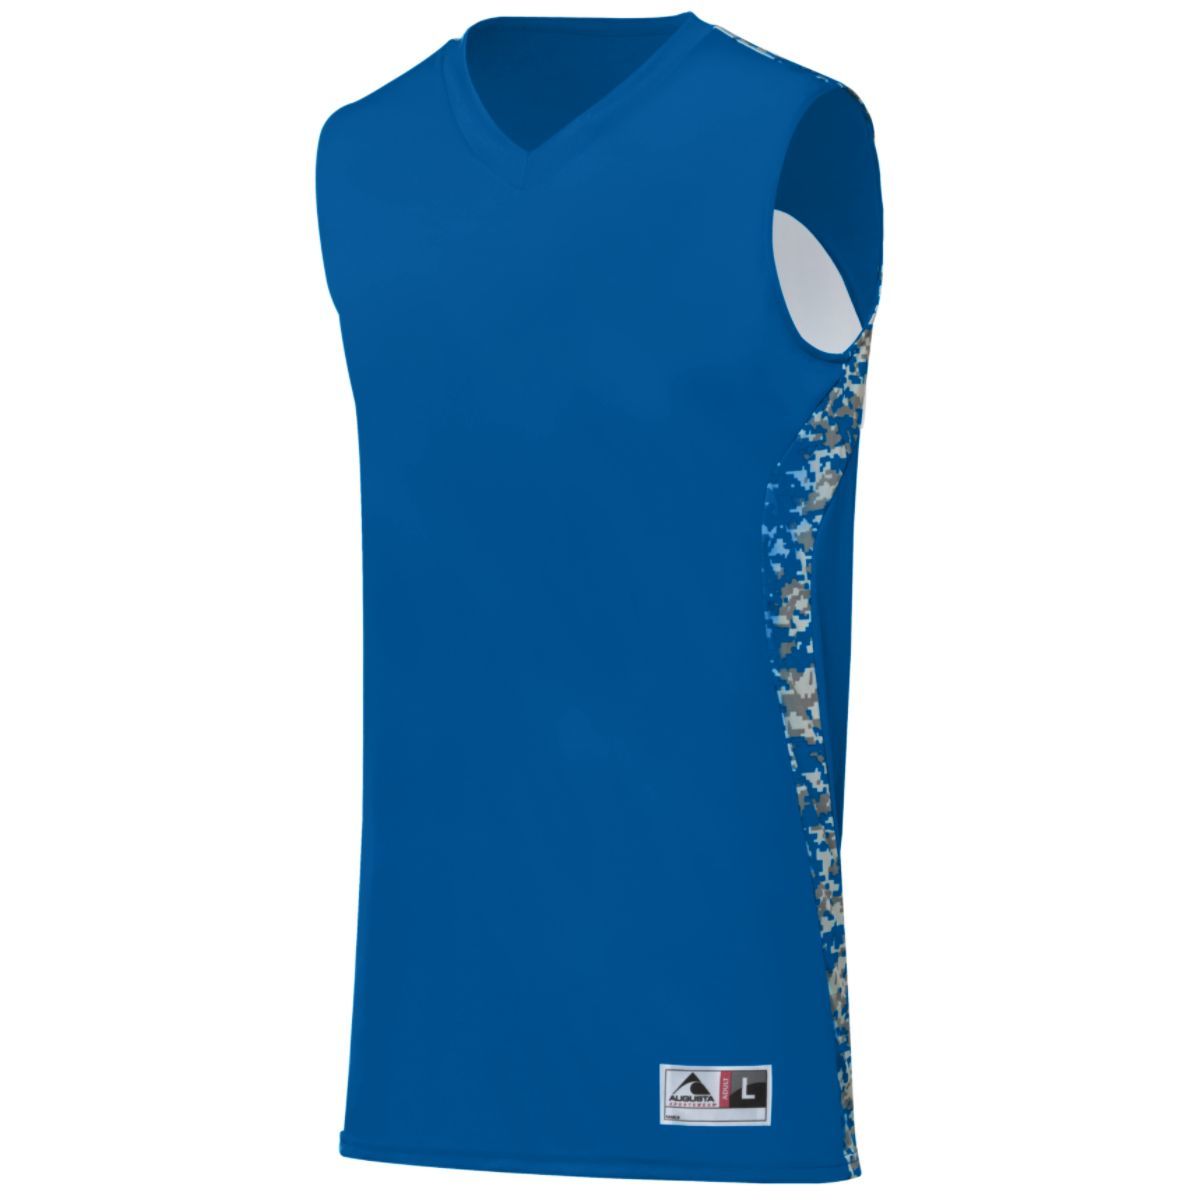 Augusta Sportswear Hook Shot Reversible Jersey in Royal/Royal Digi  -Part of the Adult, Adult-Jersey, Augusta-Products, Basketball, Shirts, All-Sports, All-Sports-1 product lines at KanaleyCreations.com